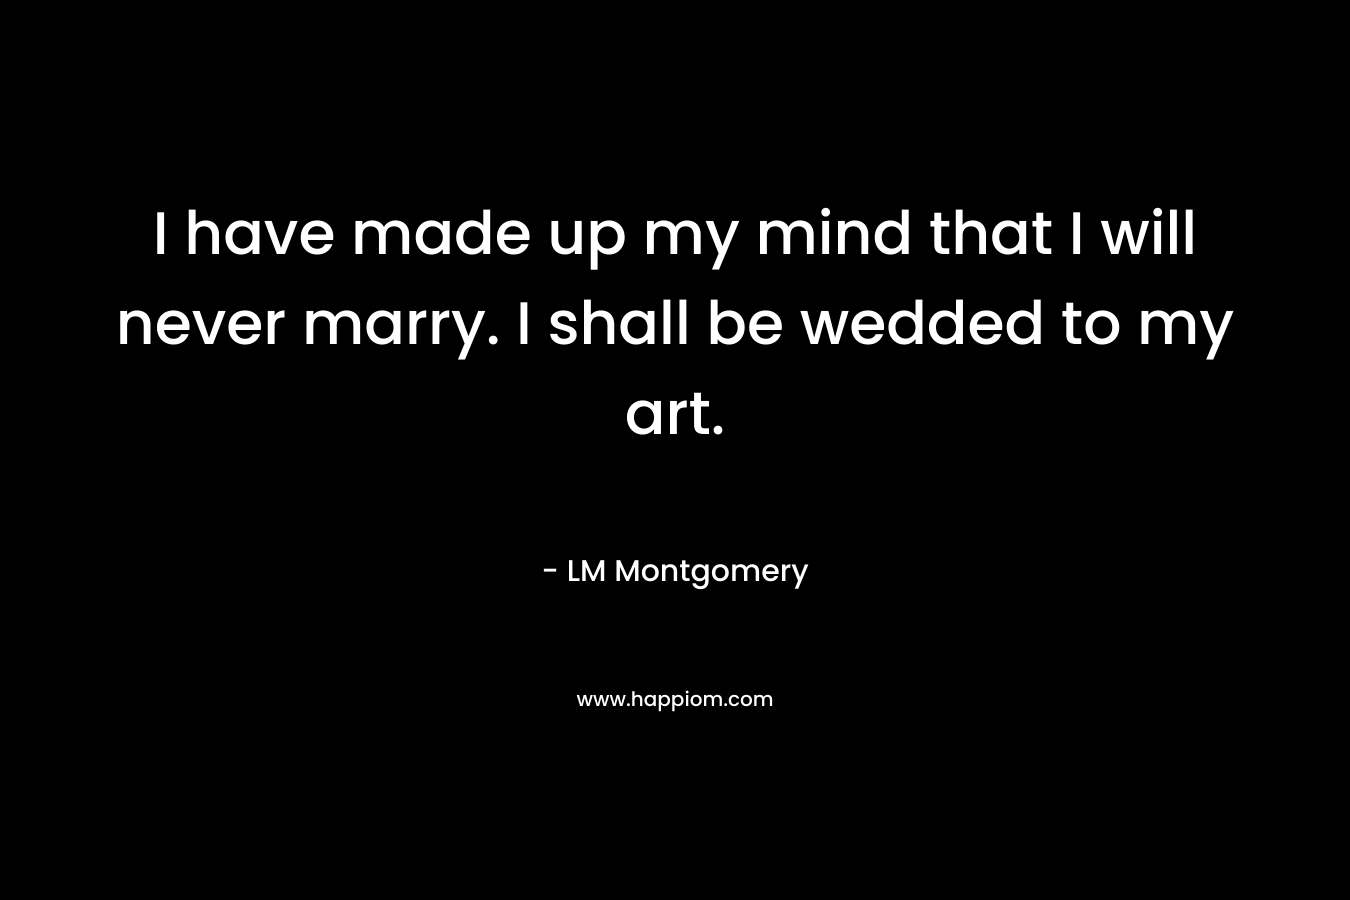 I have made up my mind that I will never marry. I shall be wedded to my art.